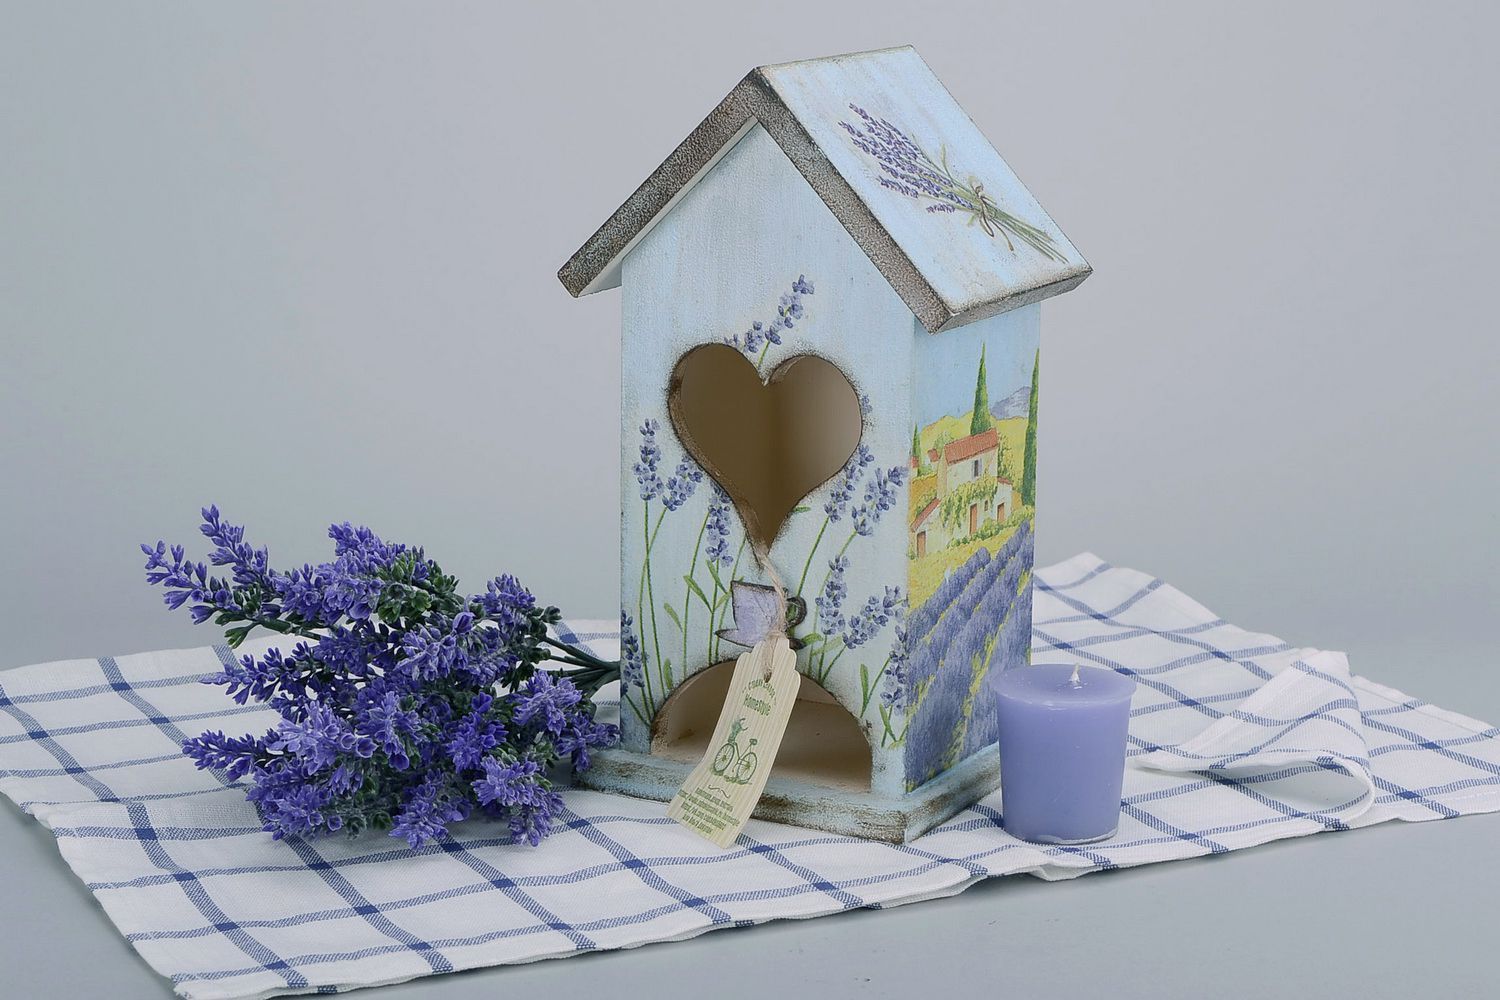 Tea-house made in the decoupage technique photo 5